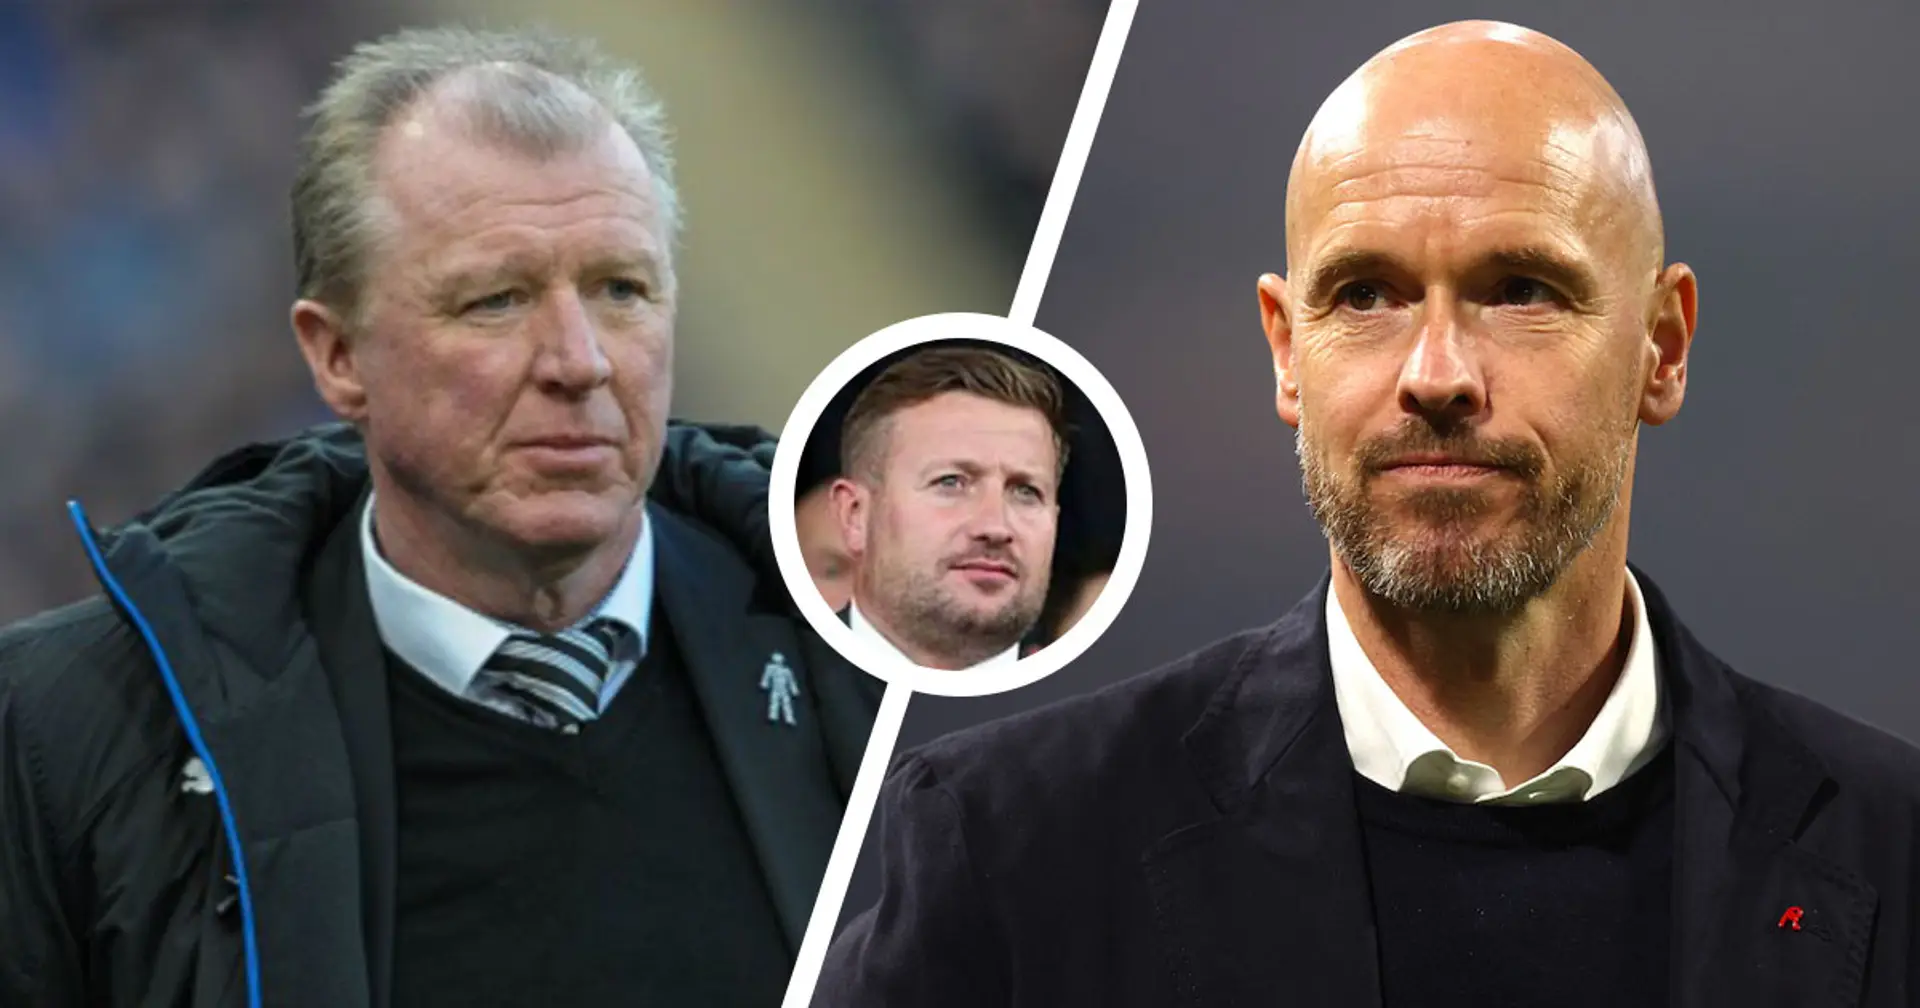 Ten Hag ‘stood firm’ on Steve McClaren appointment after being urged to consider keeping Mike Phelan